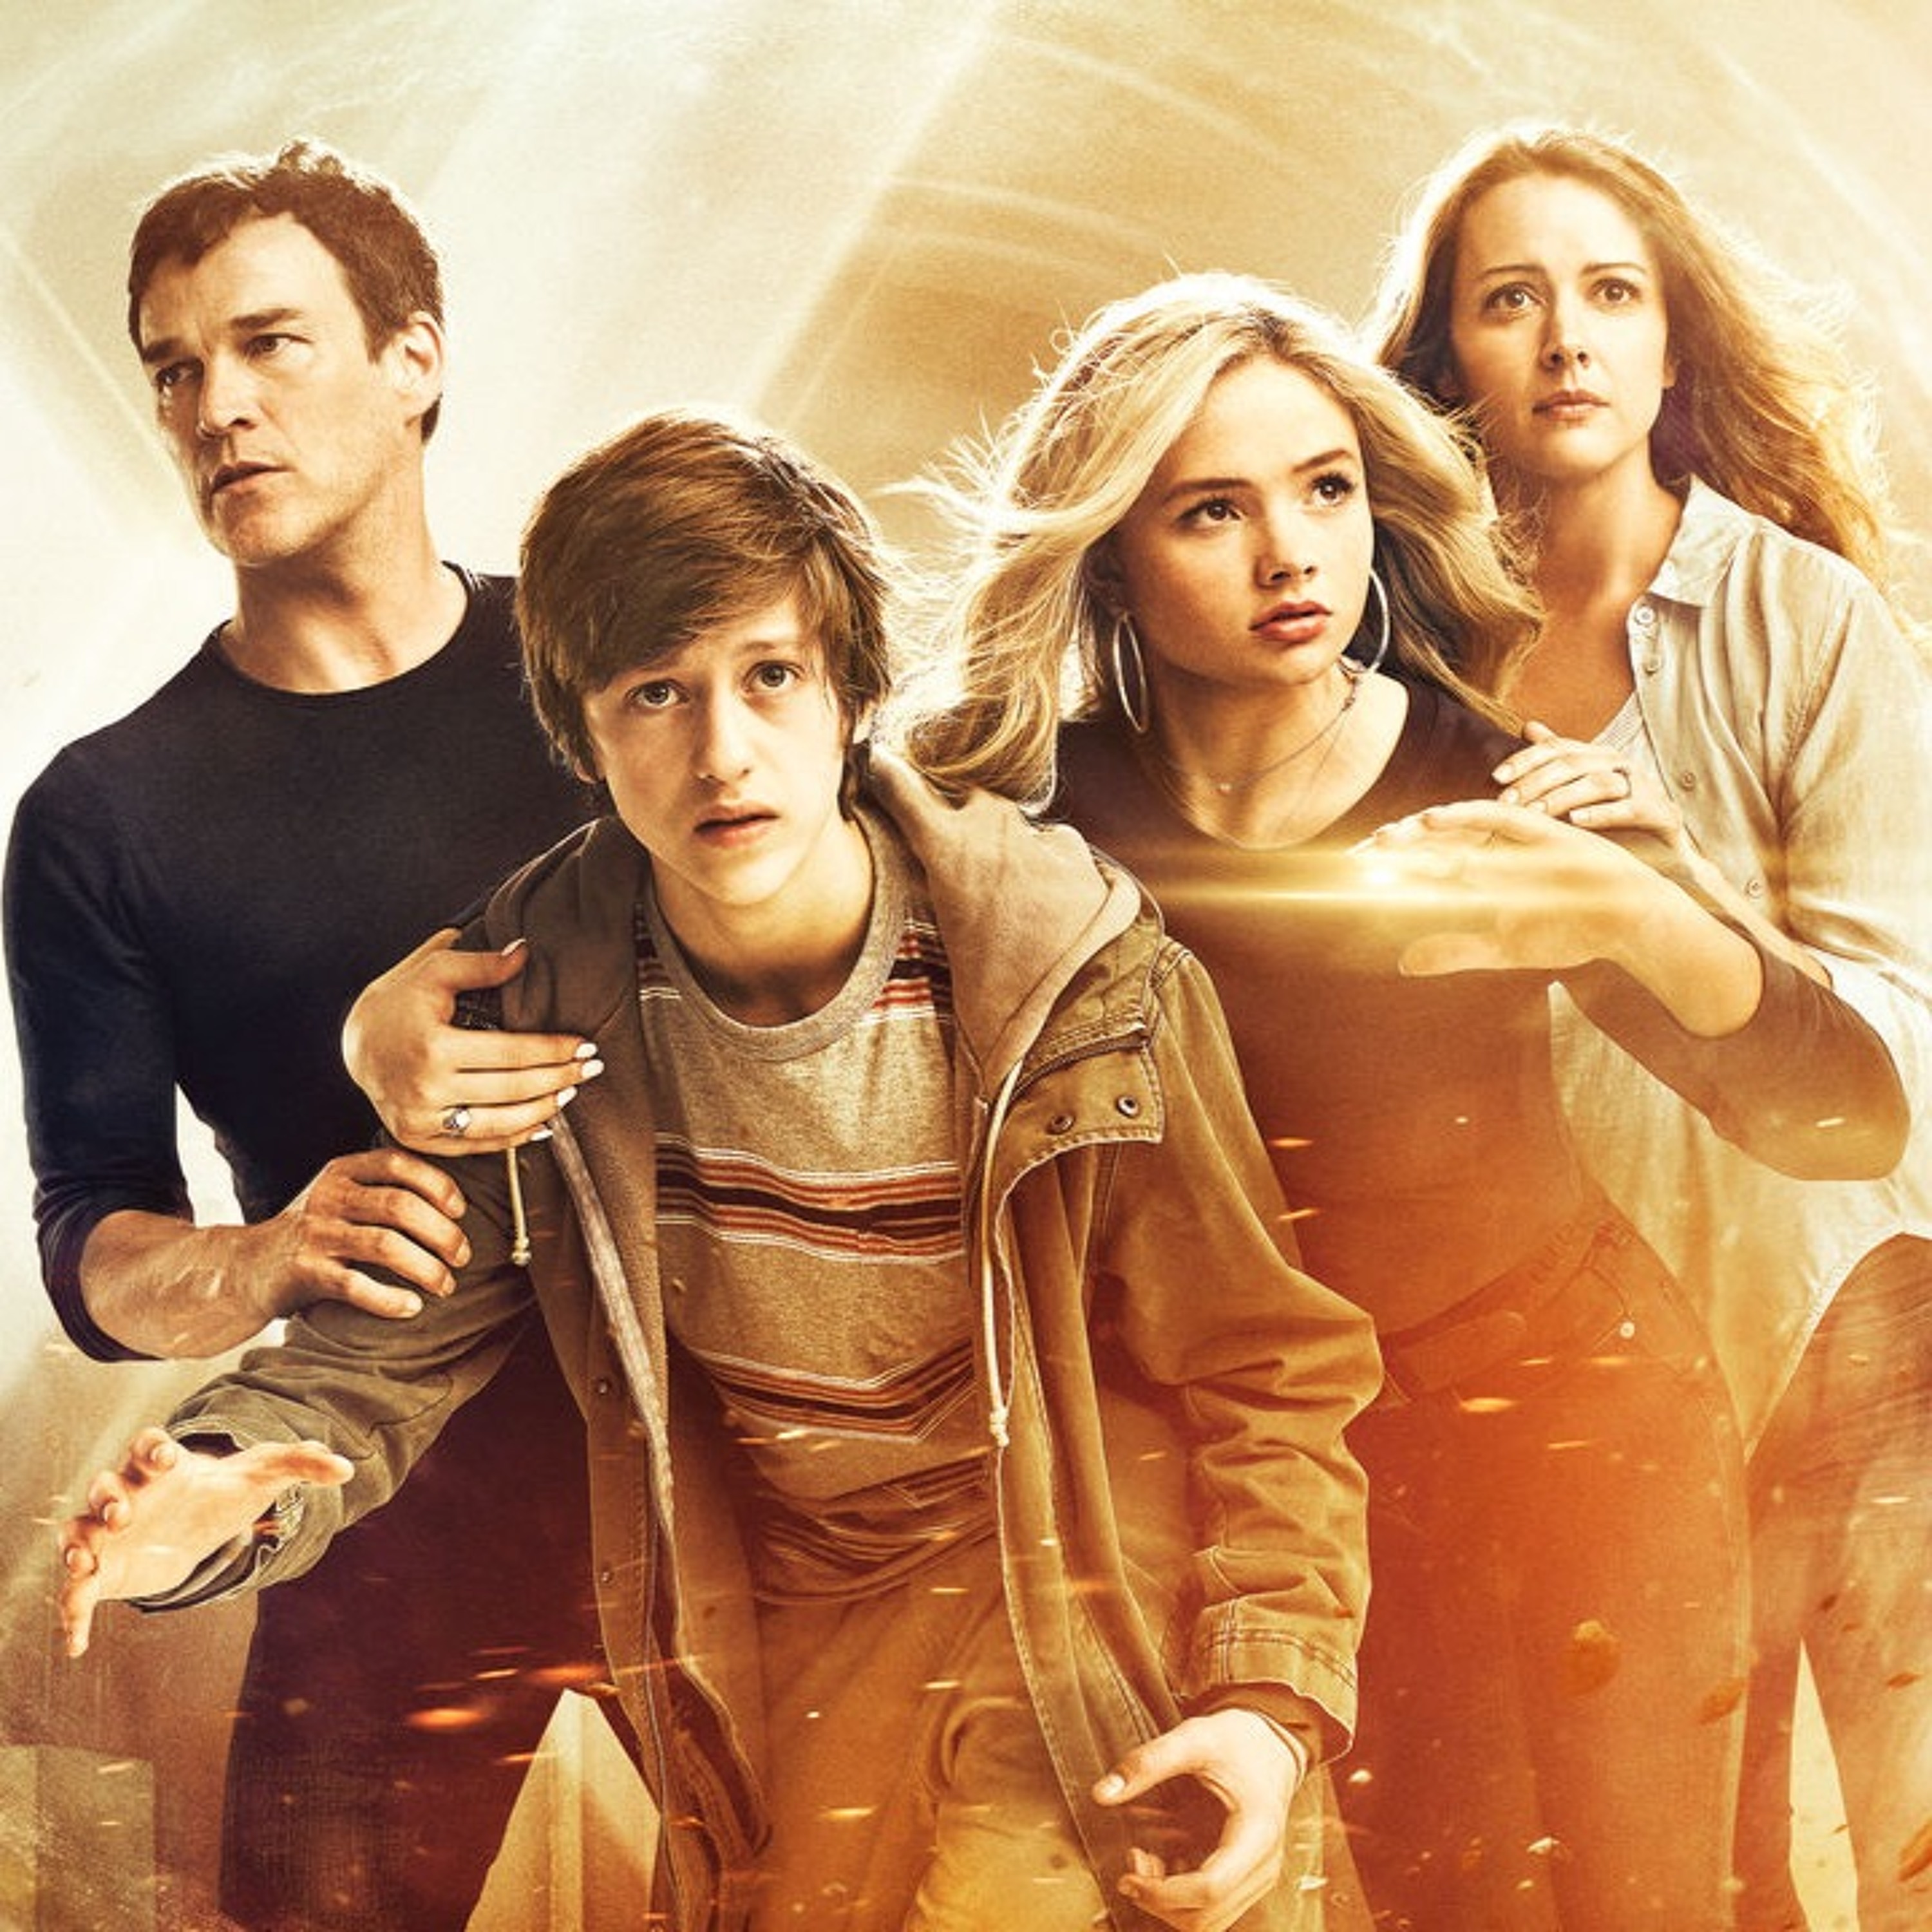 THE GIFTED: Season 1, Episode 1 - 